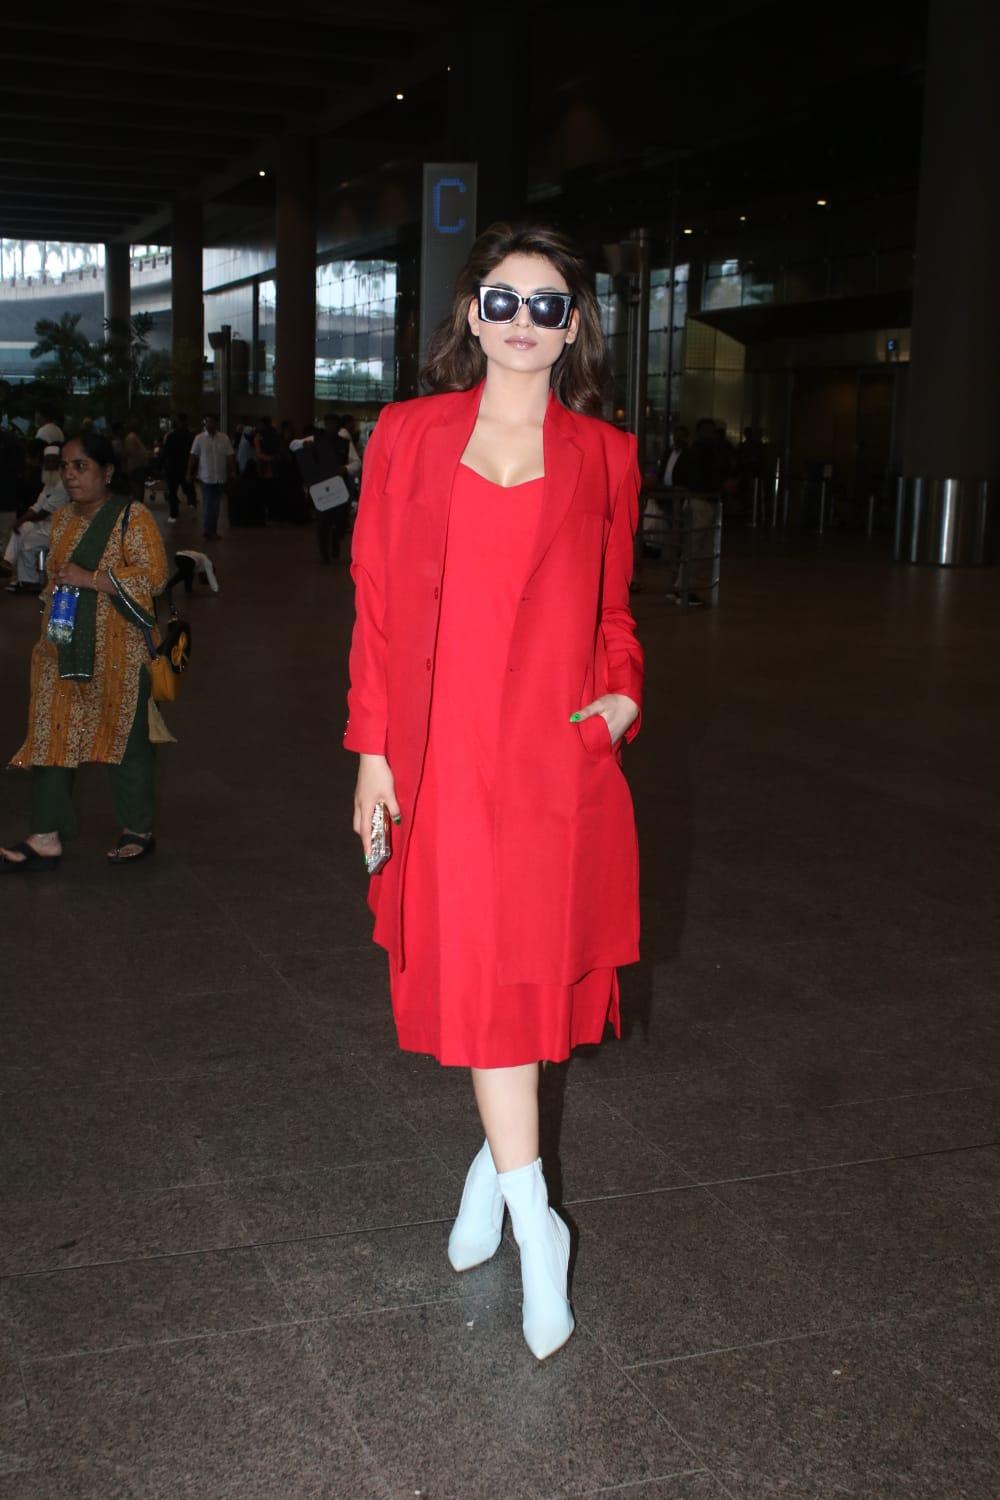 Urvashi Rautela, the archetype of striking ensembles, was also seen at the airport.